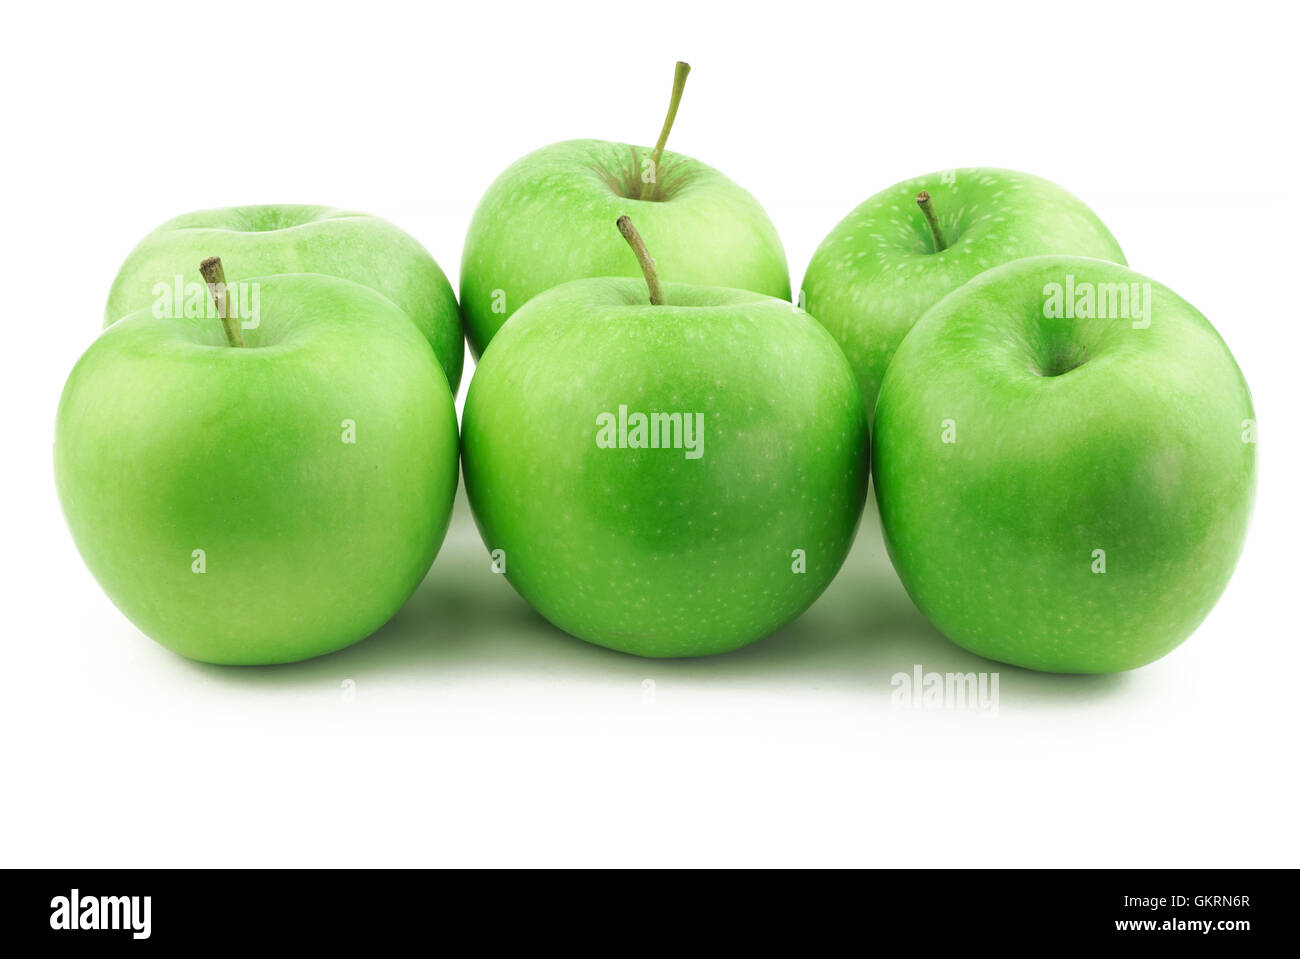 Lots of green apples Stock Photo